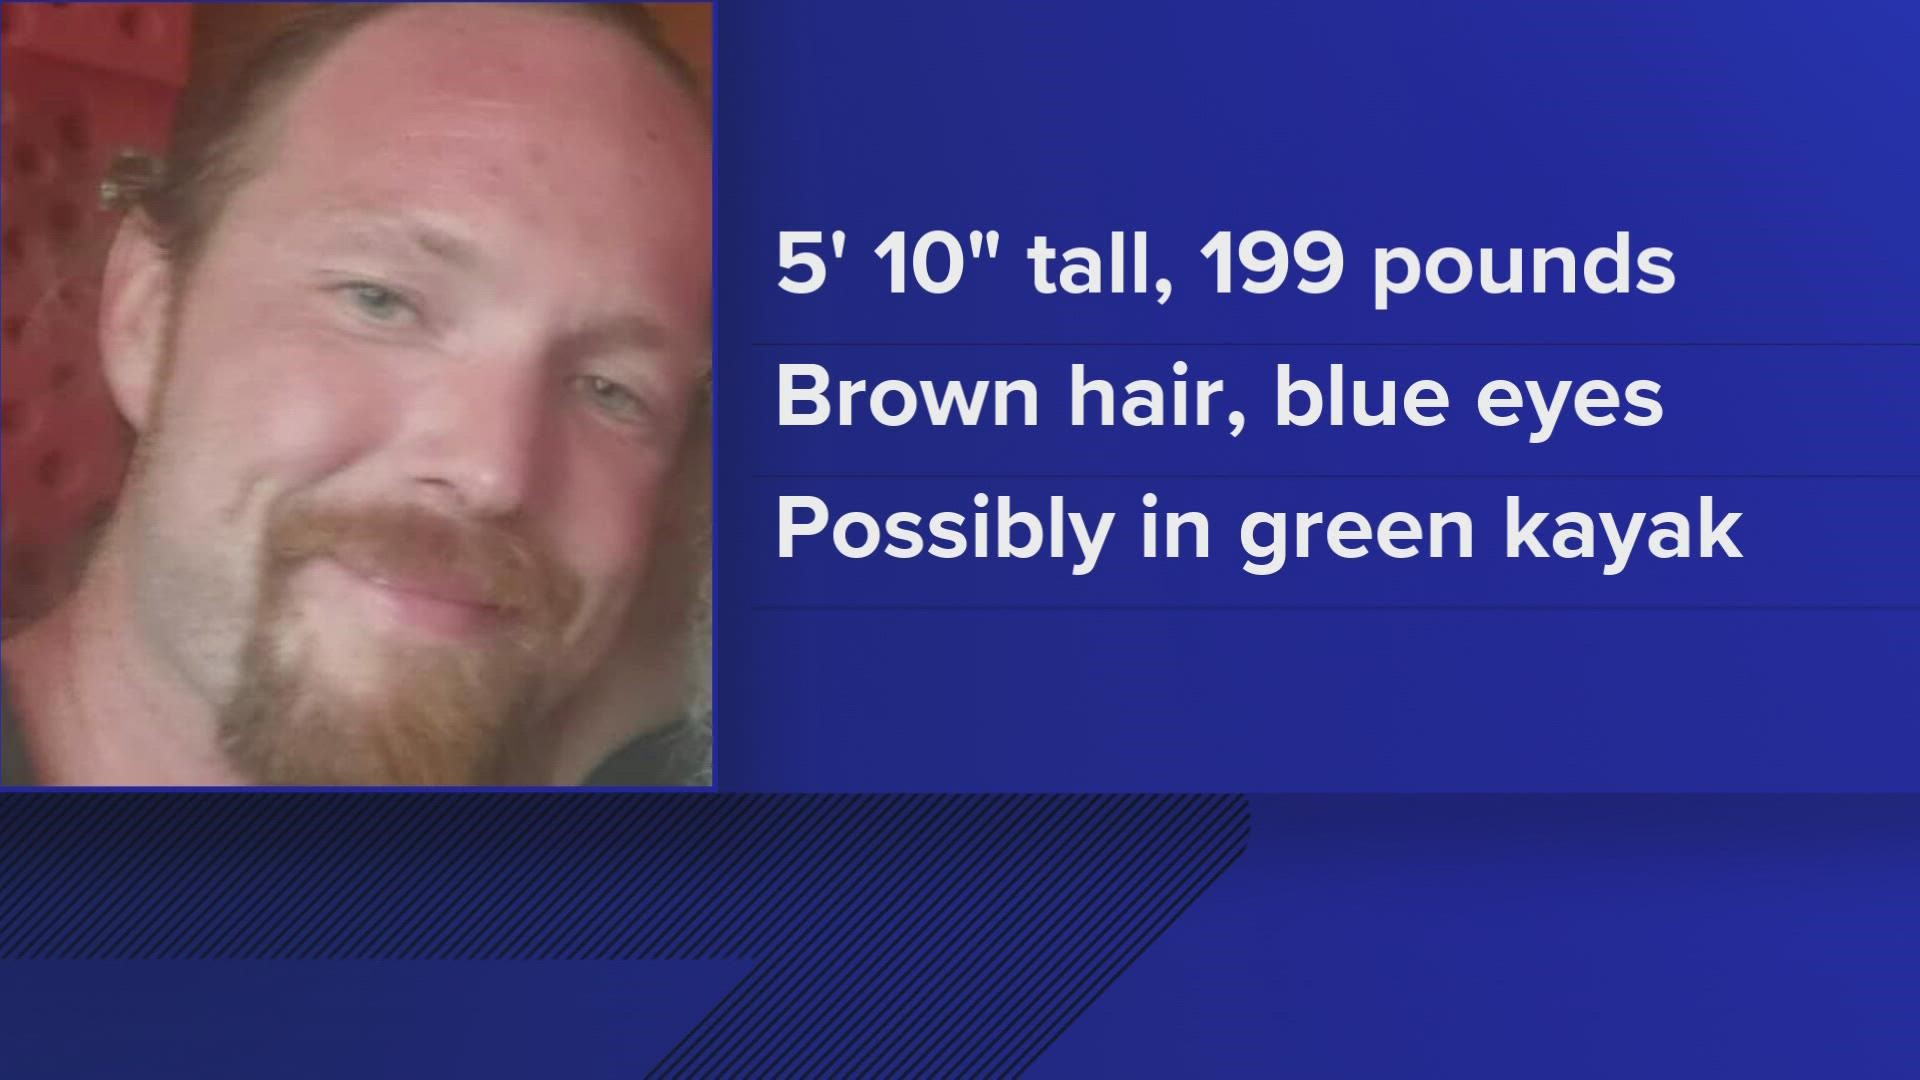 34-year-old Seth Vosmus was last seen over the weekend near Porter's Landing in Freeport.